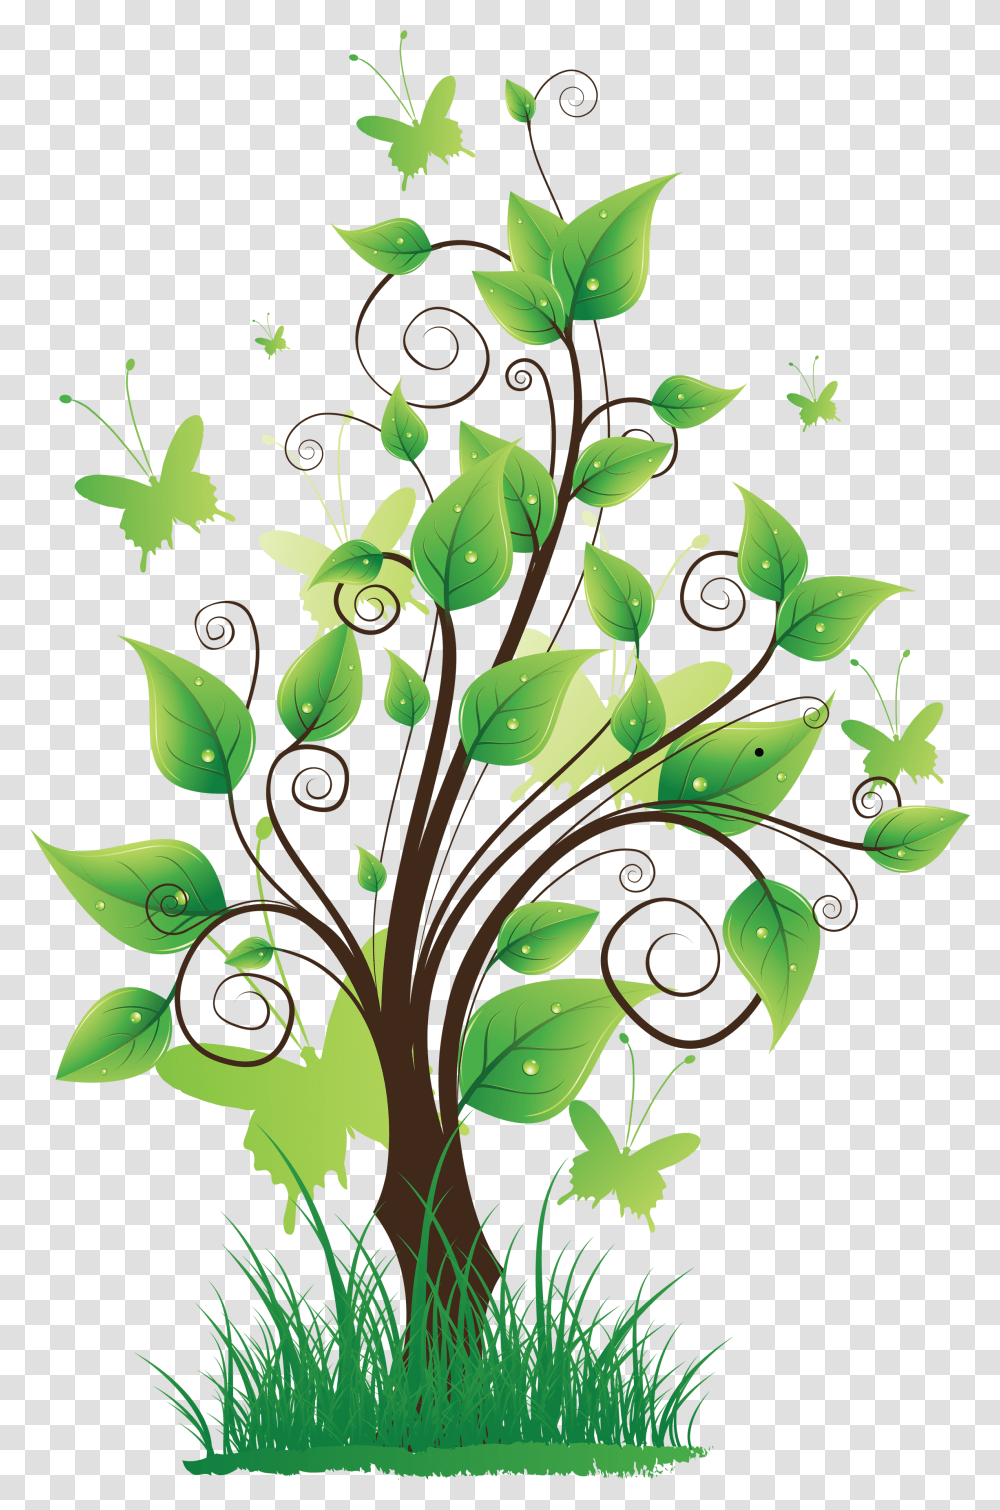 Tree Images Are Free To Download Nature Tree Background Design, Leaf, Plant, Green, Graphics Transparent Png